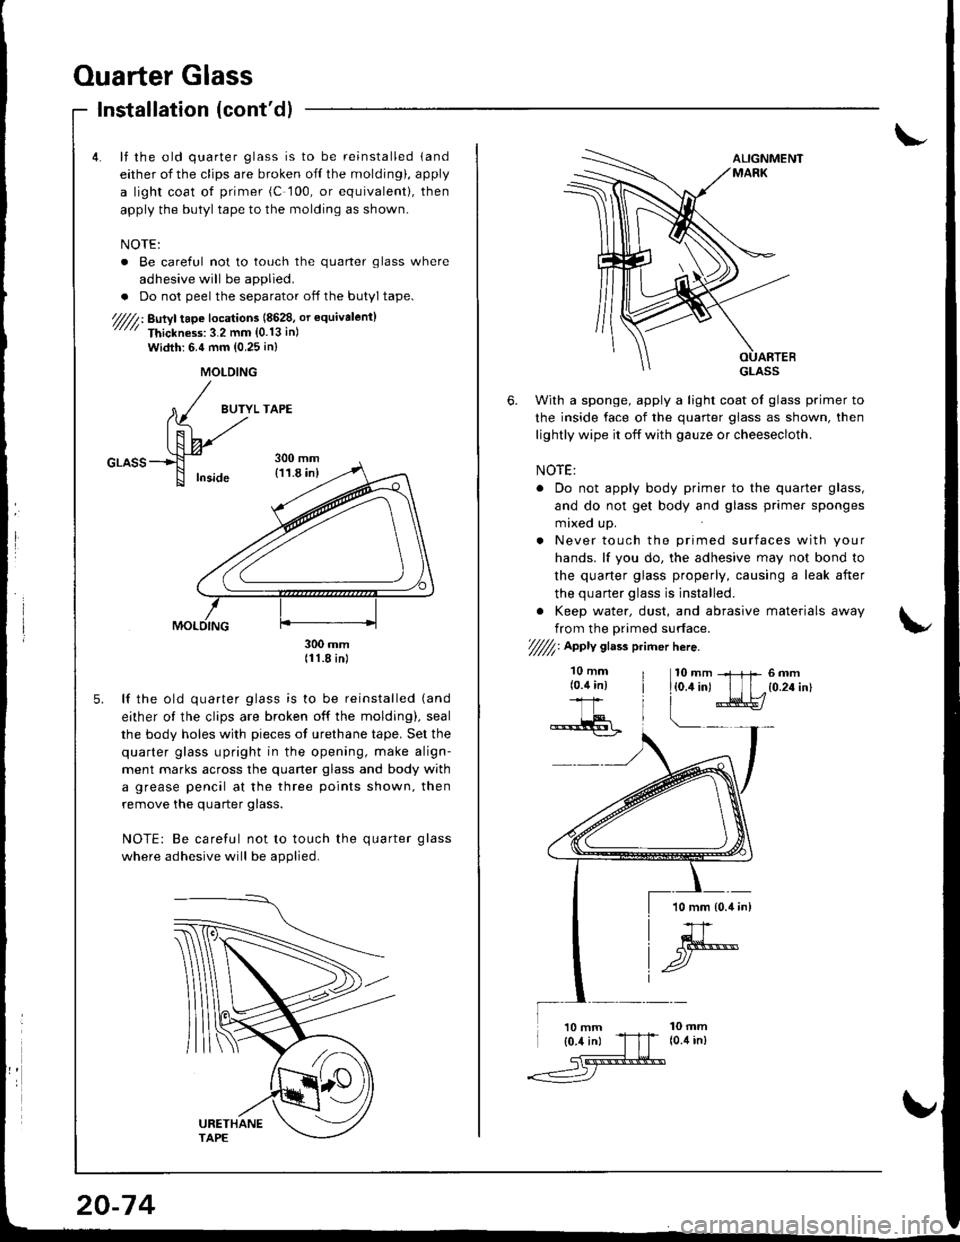 HONDA INTEGRA 1998 4.G Workshop Manual Ouarter Glass
Installation (contd)
lf the old quarter glass is to be reinstalled land
either of the clips are broken off the molding), apply
a light coat ot primer (C 100, or equivalent|, then
apply 